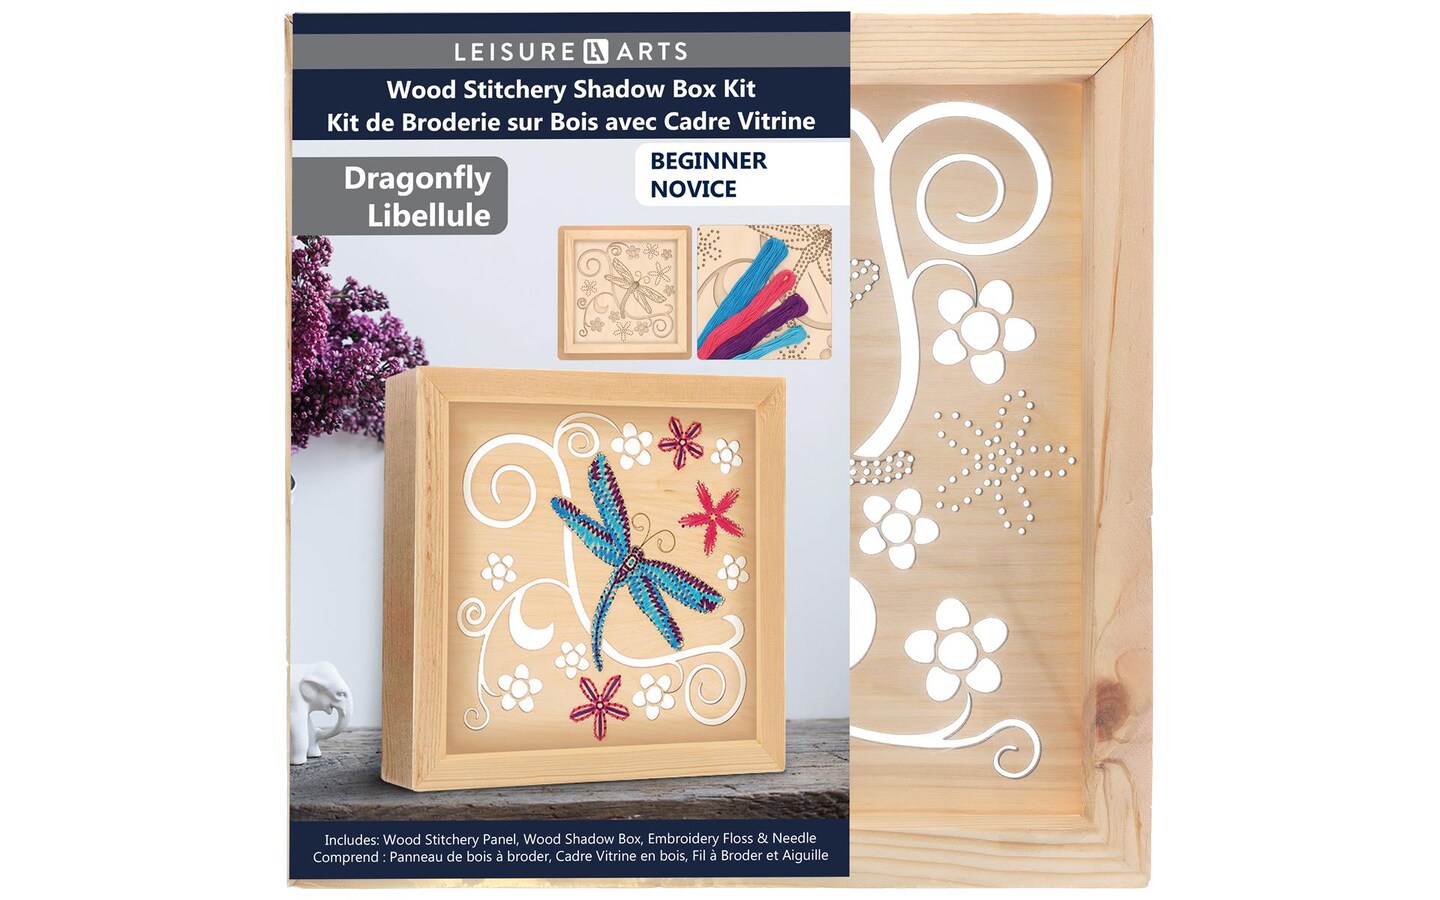 Wood Stitched String Art Kit with Shadow Box Hexagon Flower - adult or kids  craft - craft kits for teens - string art kit for adults - 3d string art -  3d